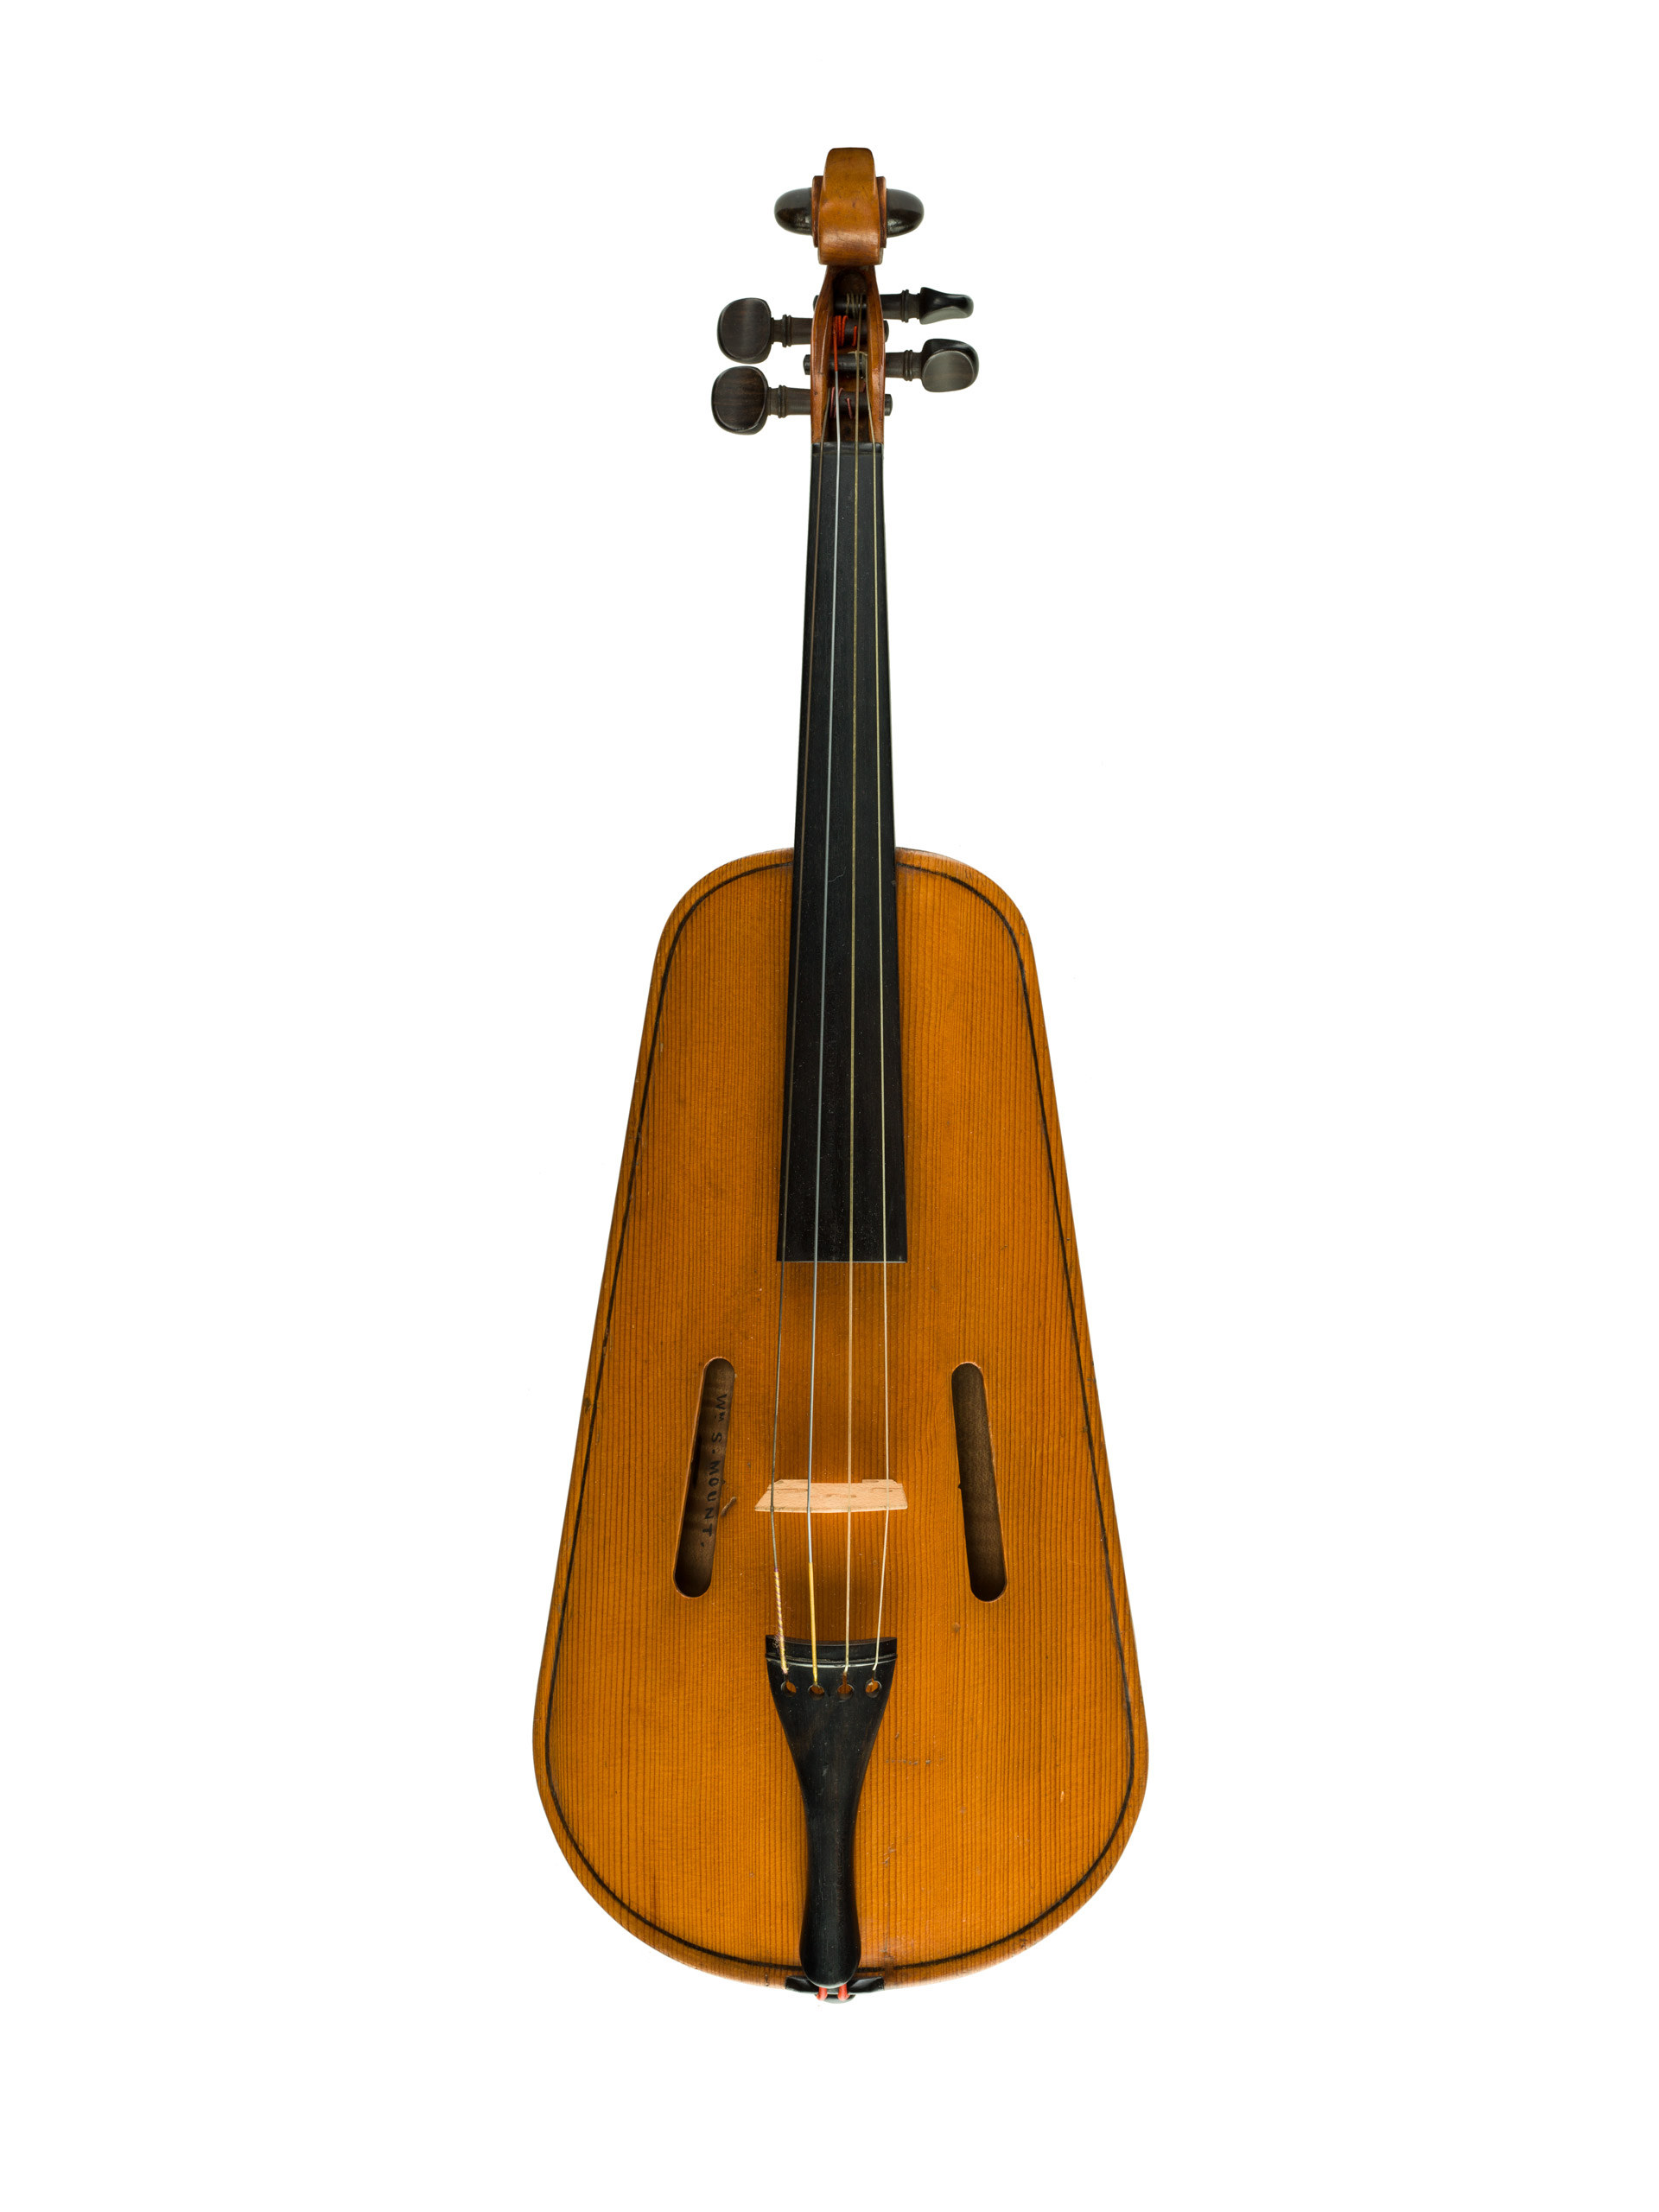 Violin, 1852: William S. Mount, (Patent No. 8981). William S. Mount proposed creating violins with concave or hollow backs. This patent model represented a design innovation that would minimize the strain on the violin soundboard and avoid interference with the “sonorous and vibrating qualities” of the instrument.